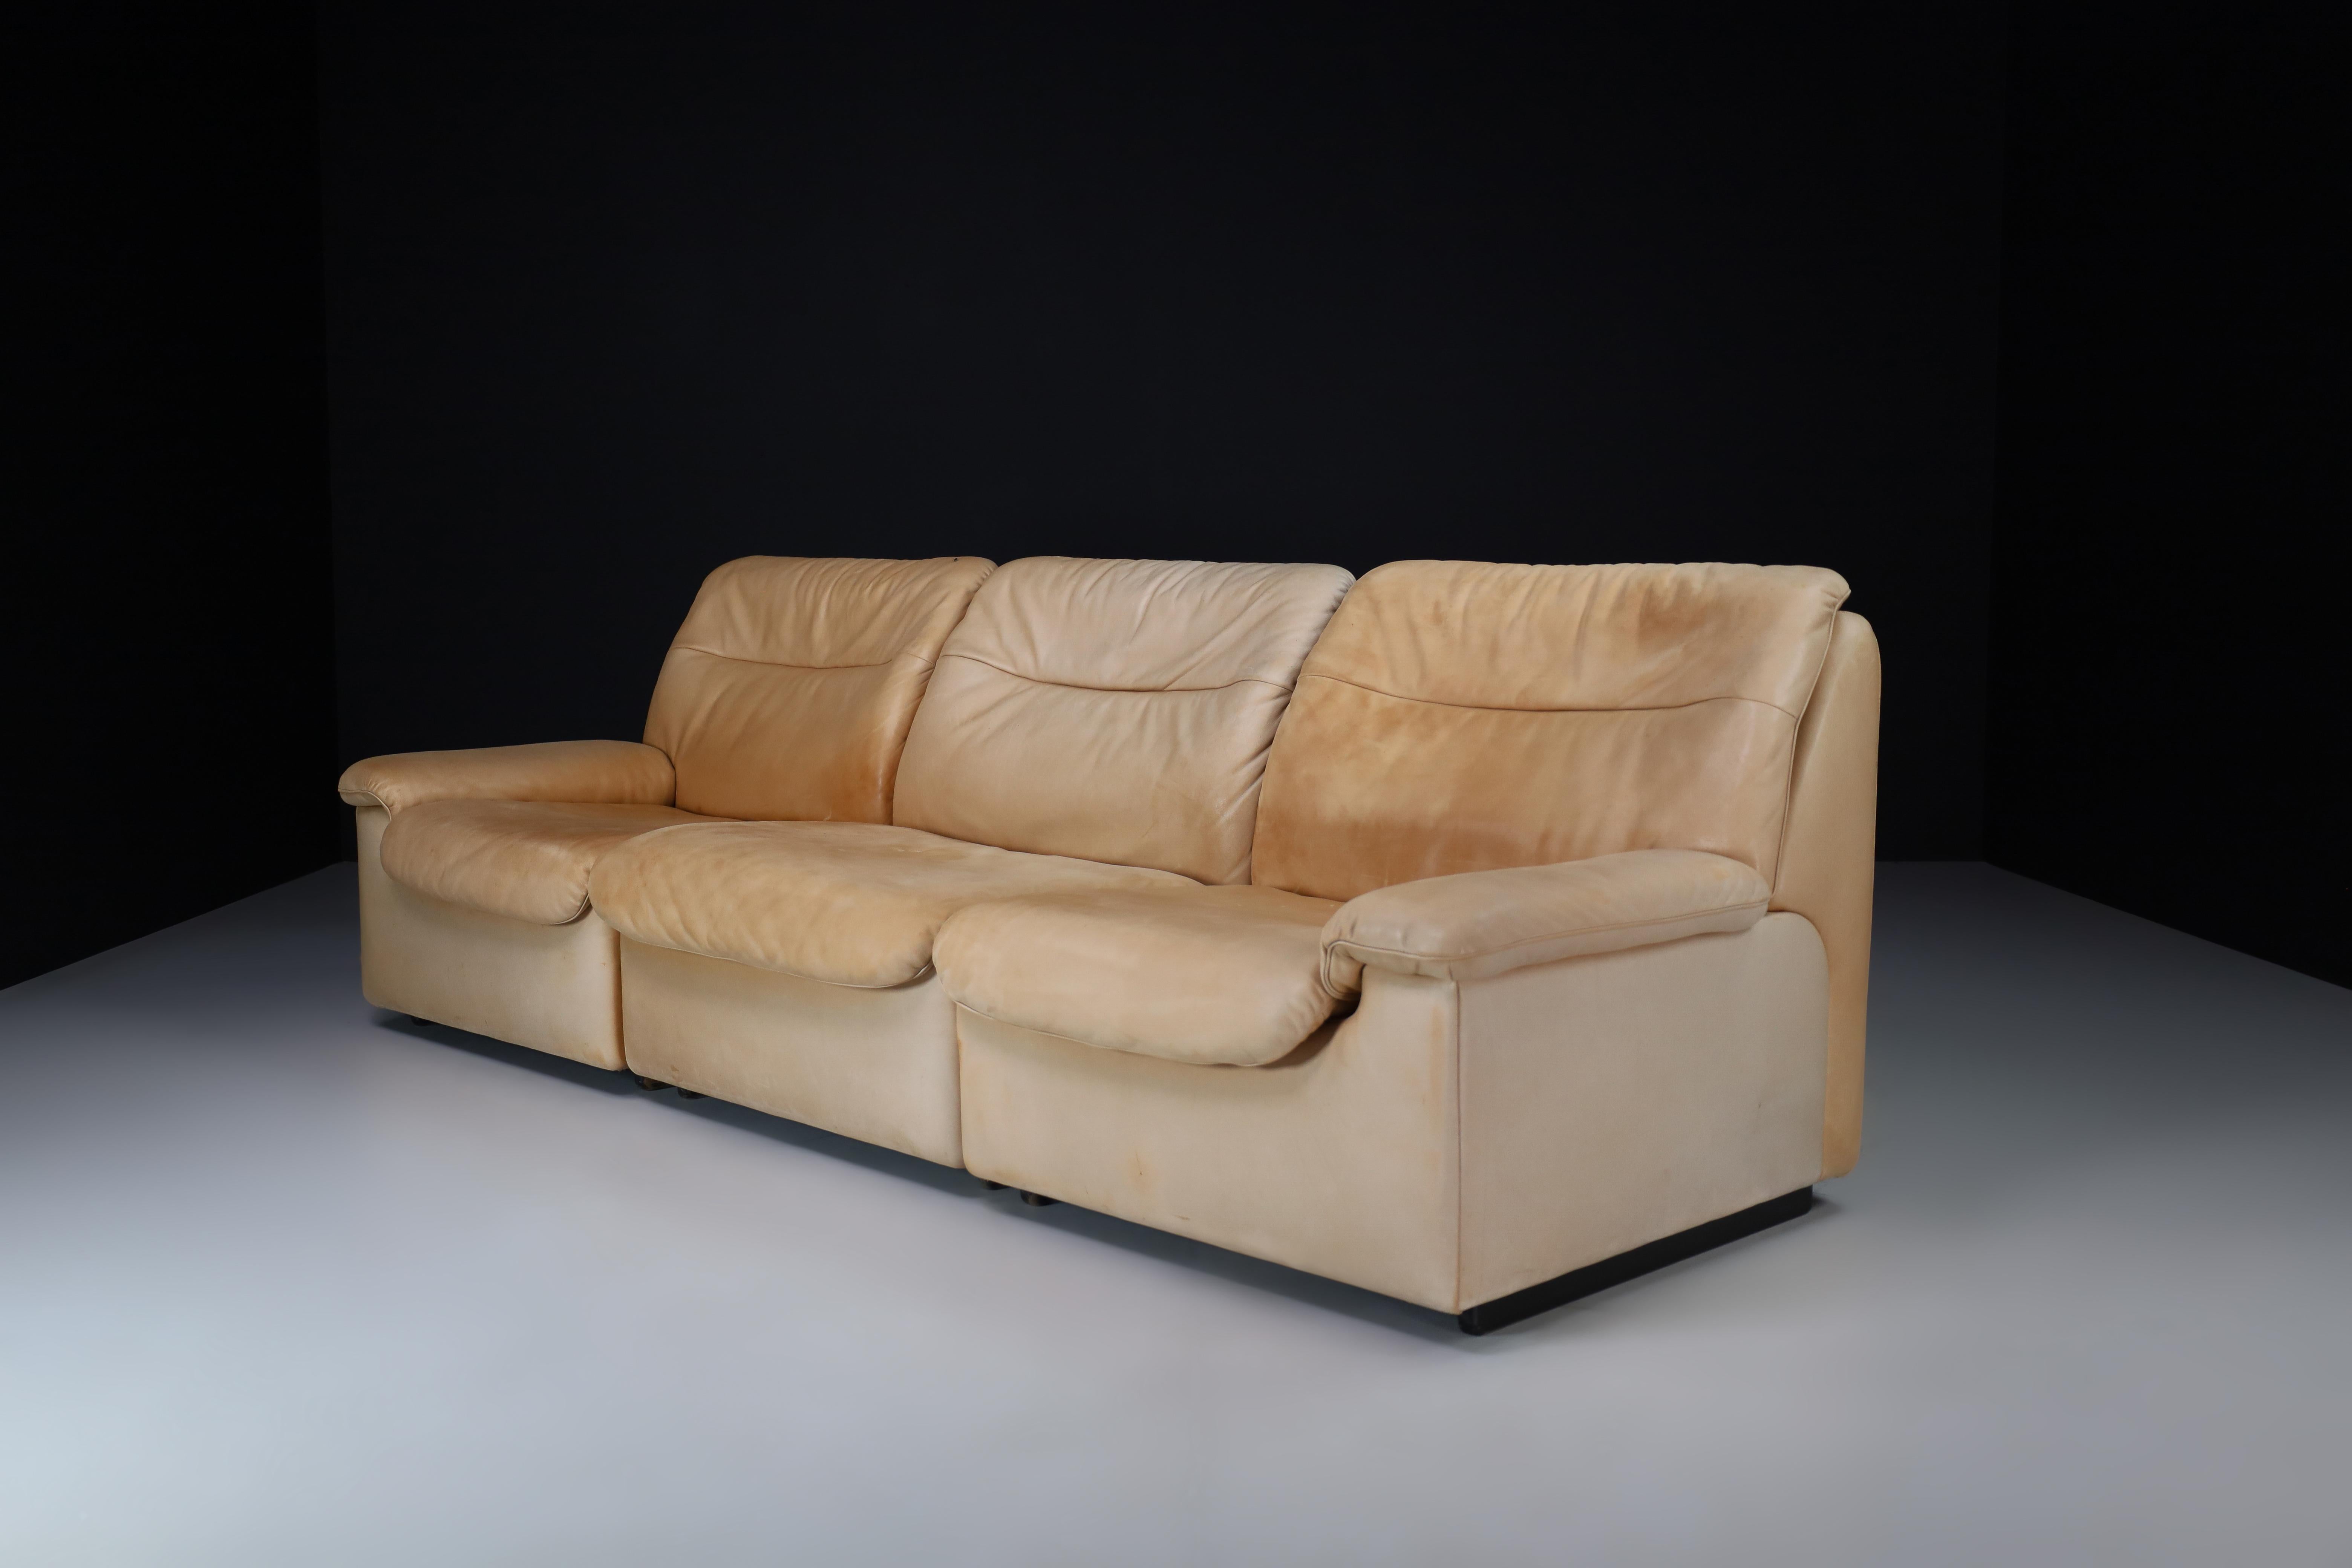 De Sede DS 63 three-seater sofa in leather, Switzerland 1970s

Robust DS-63 modular three-seater sofa. This De Sede sofa ensures ultimate comfort and building quality with its solid wooden frame and thick hand-stitched leather upholstery. Nice